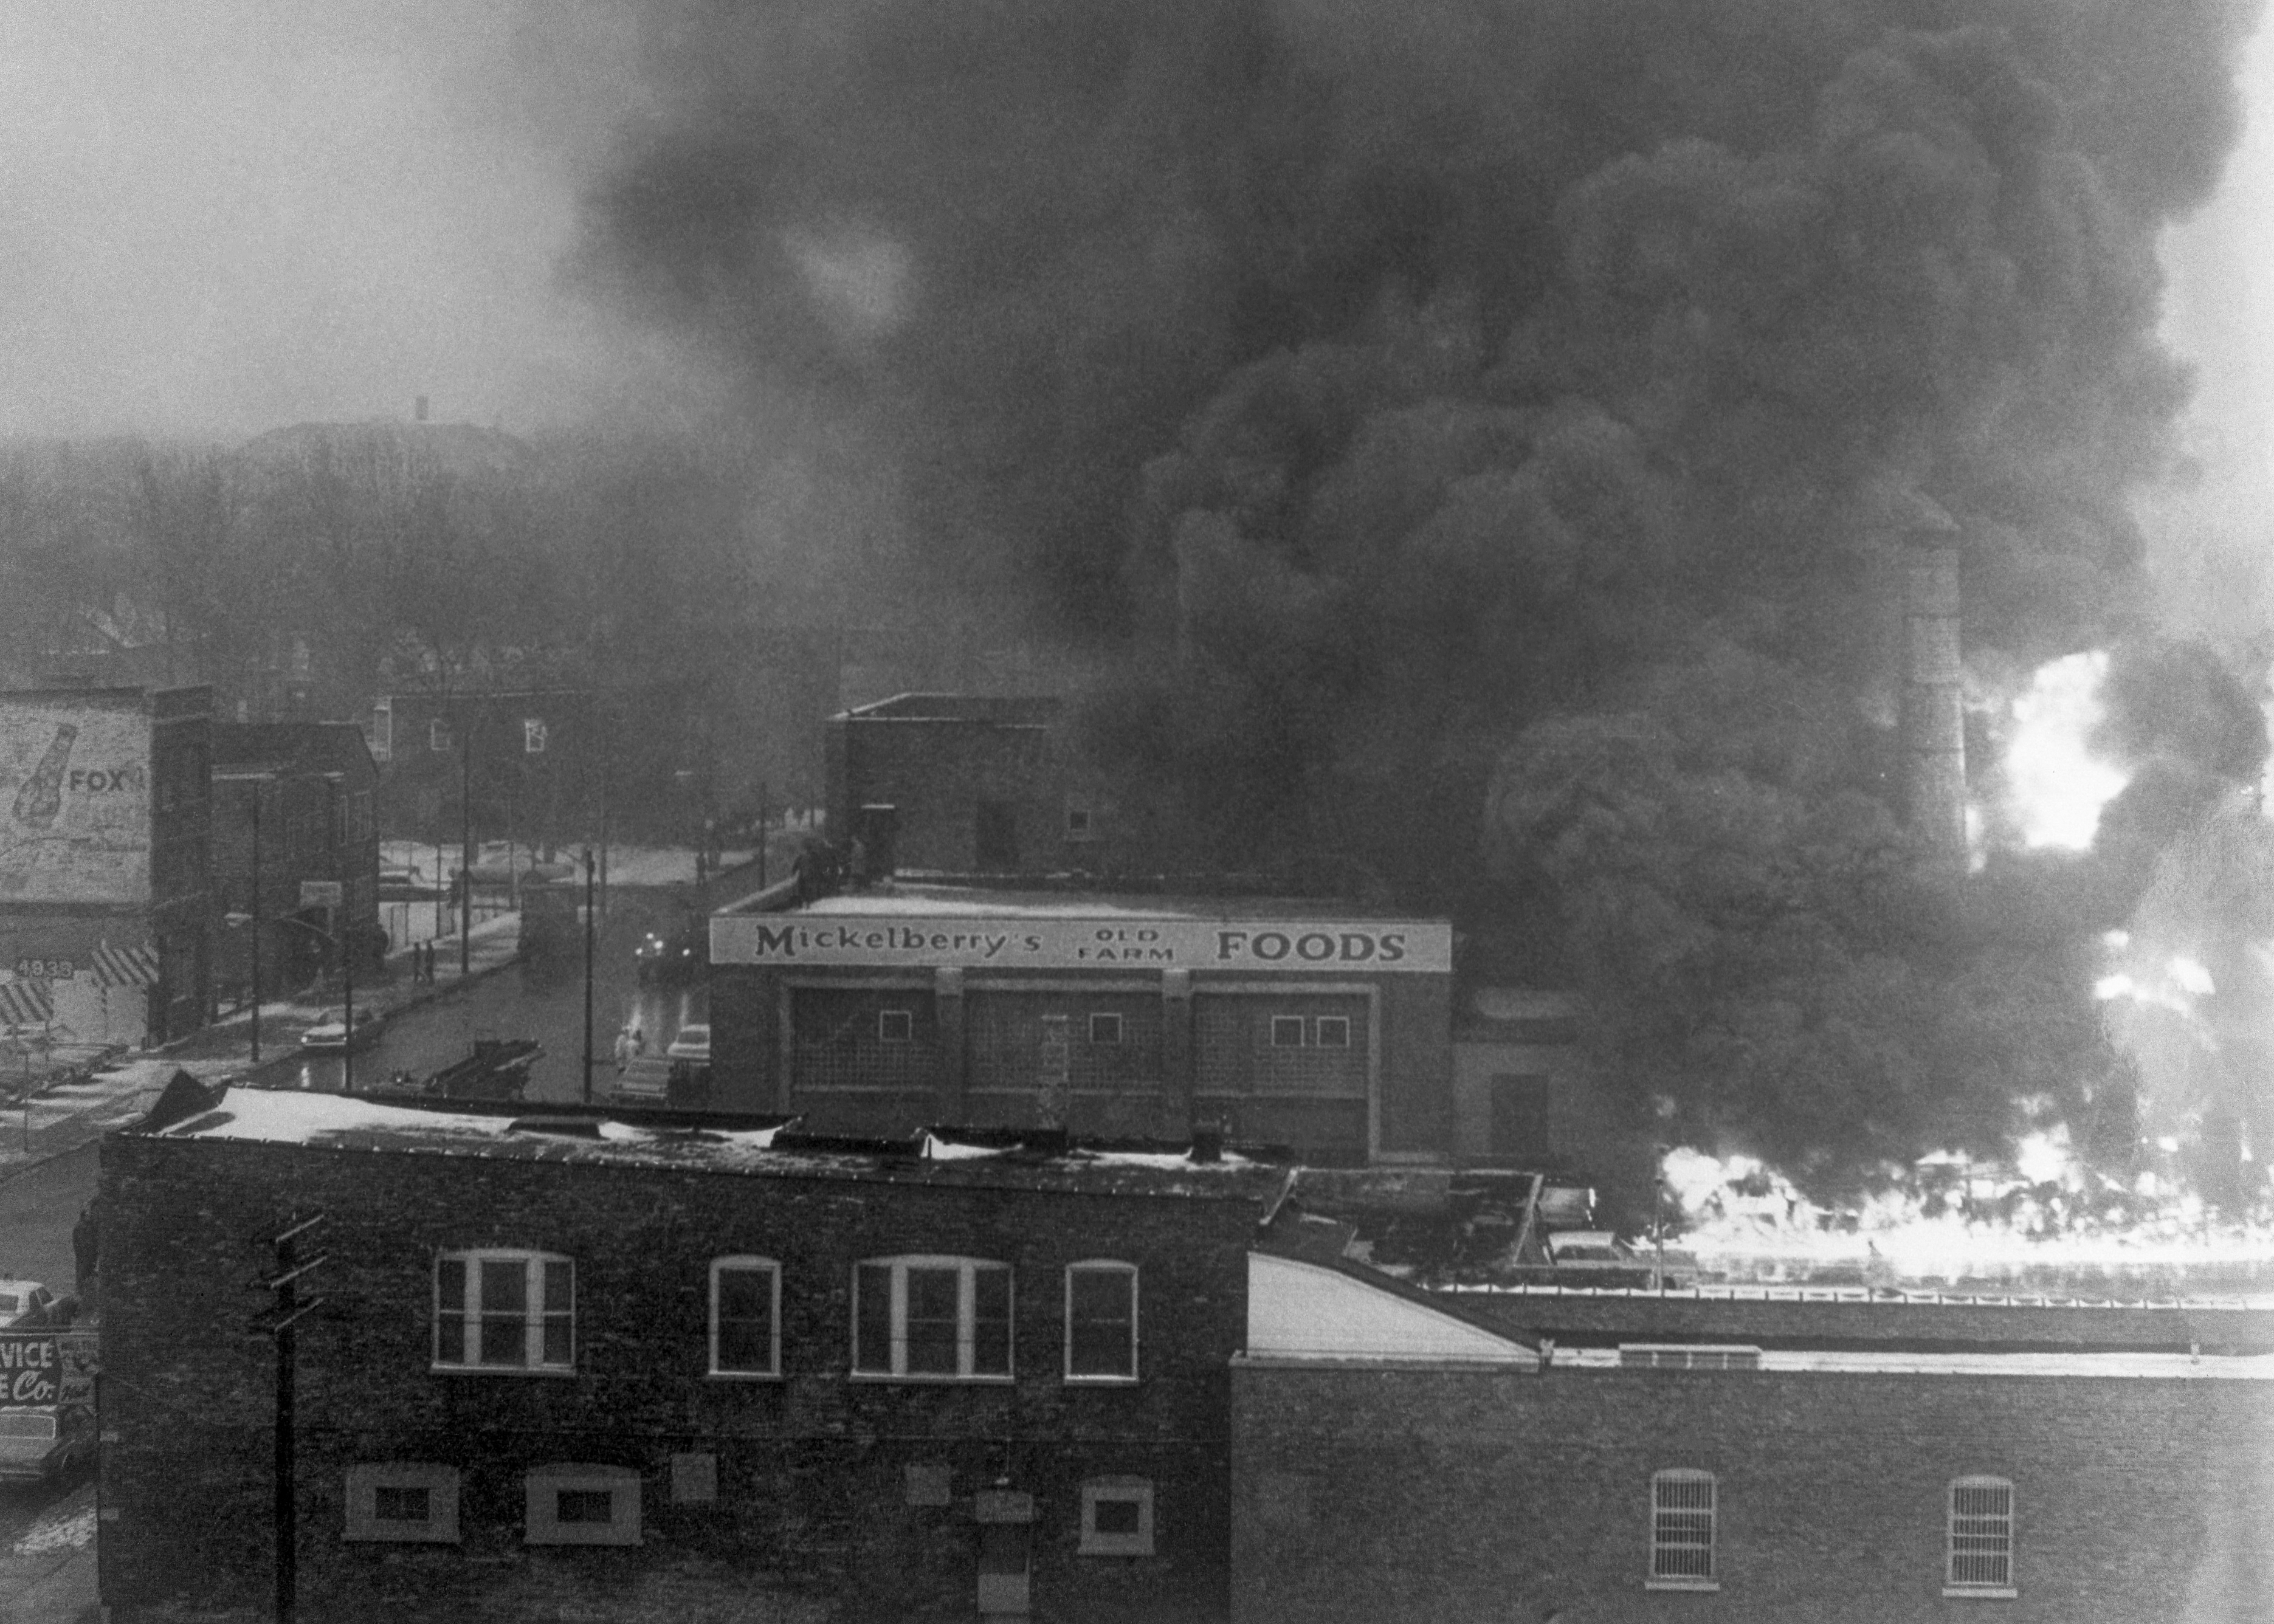 early photo of the Mickelberry fire in Chicago 